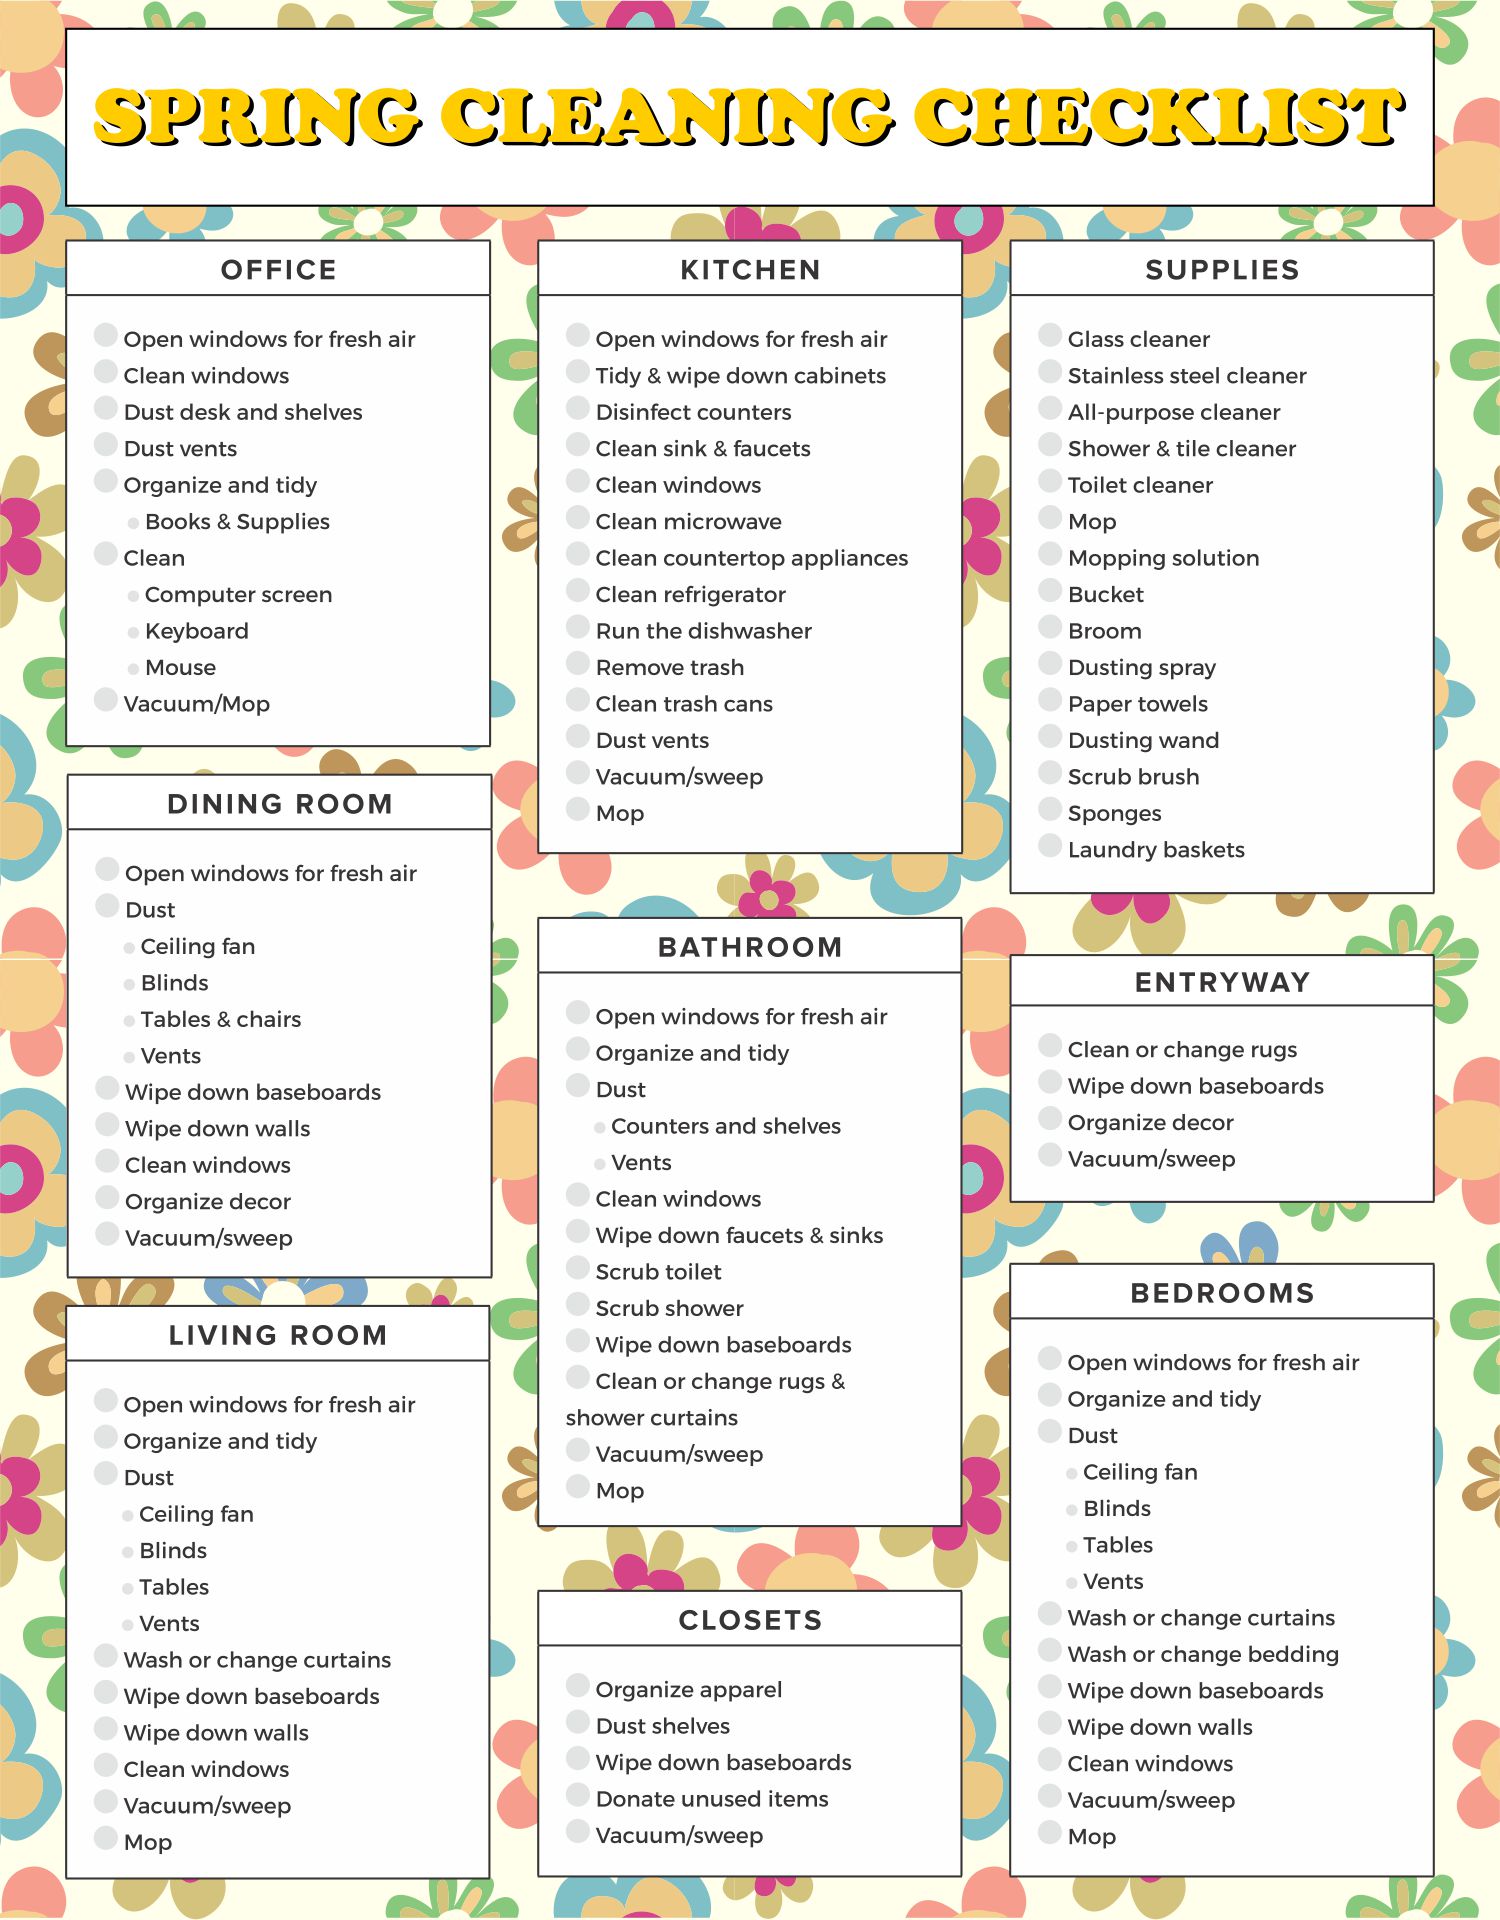 Restaurant Kitchen Cleaning Schedule Template from www.printablee.com